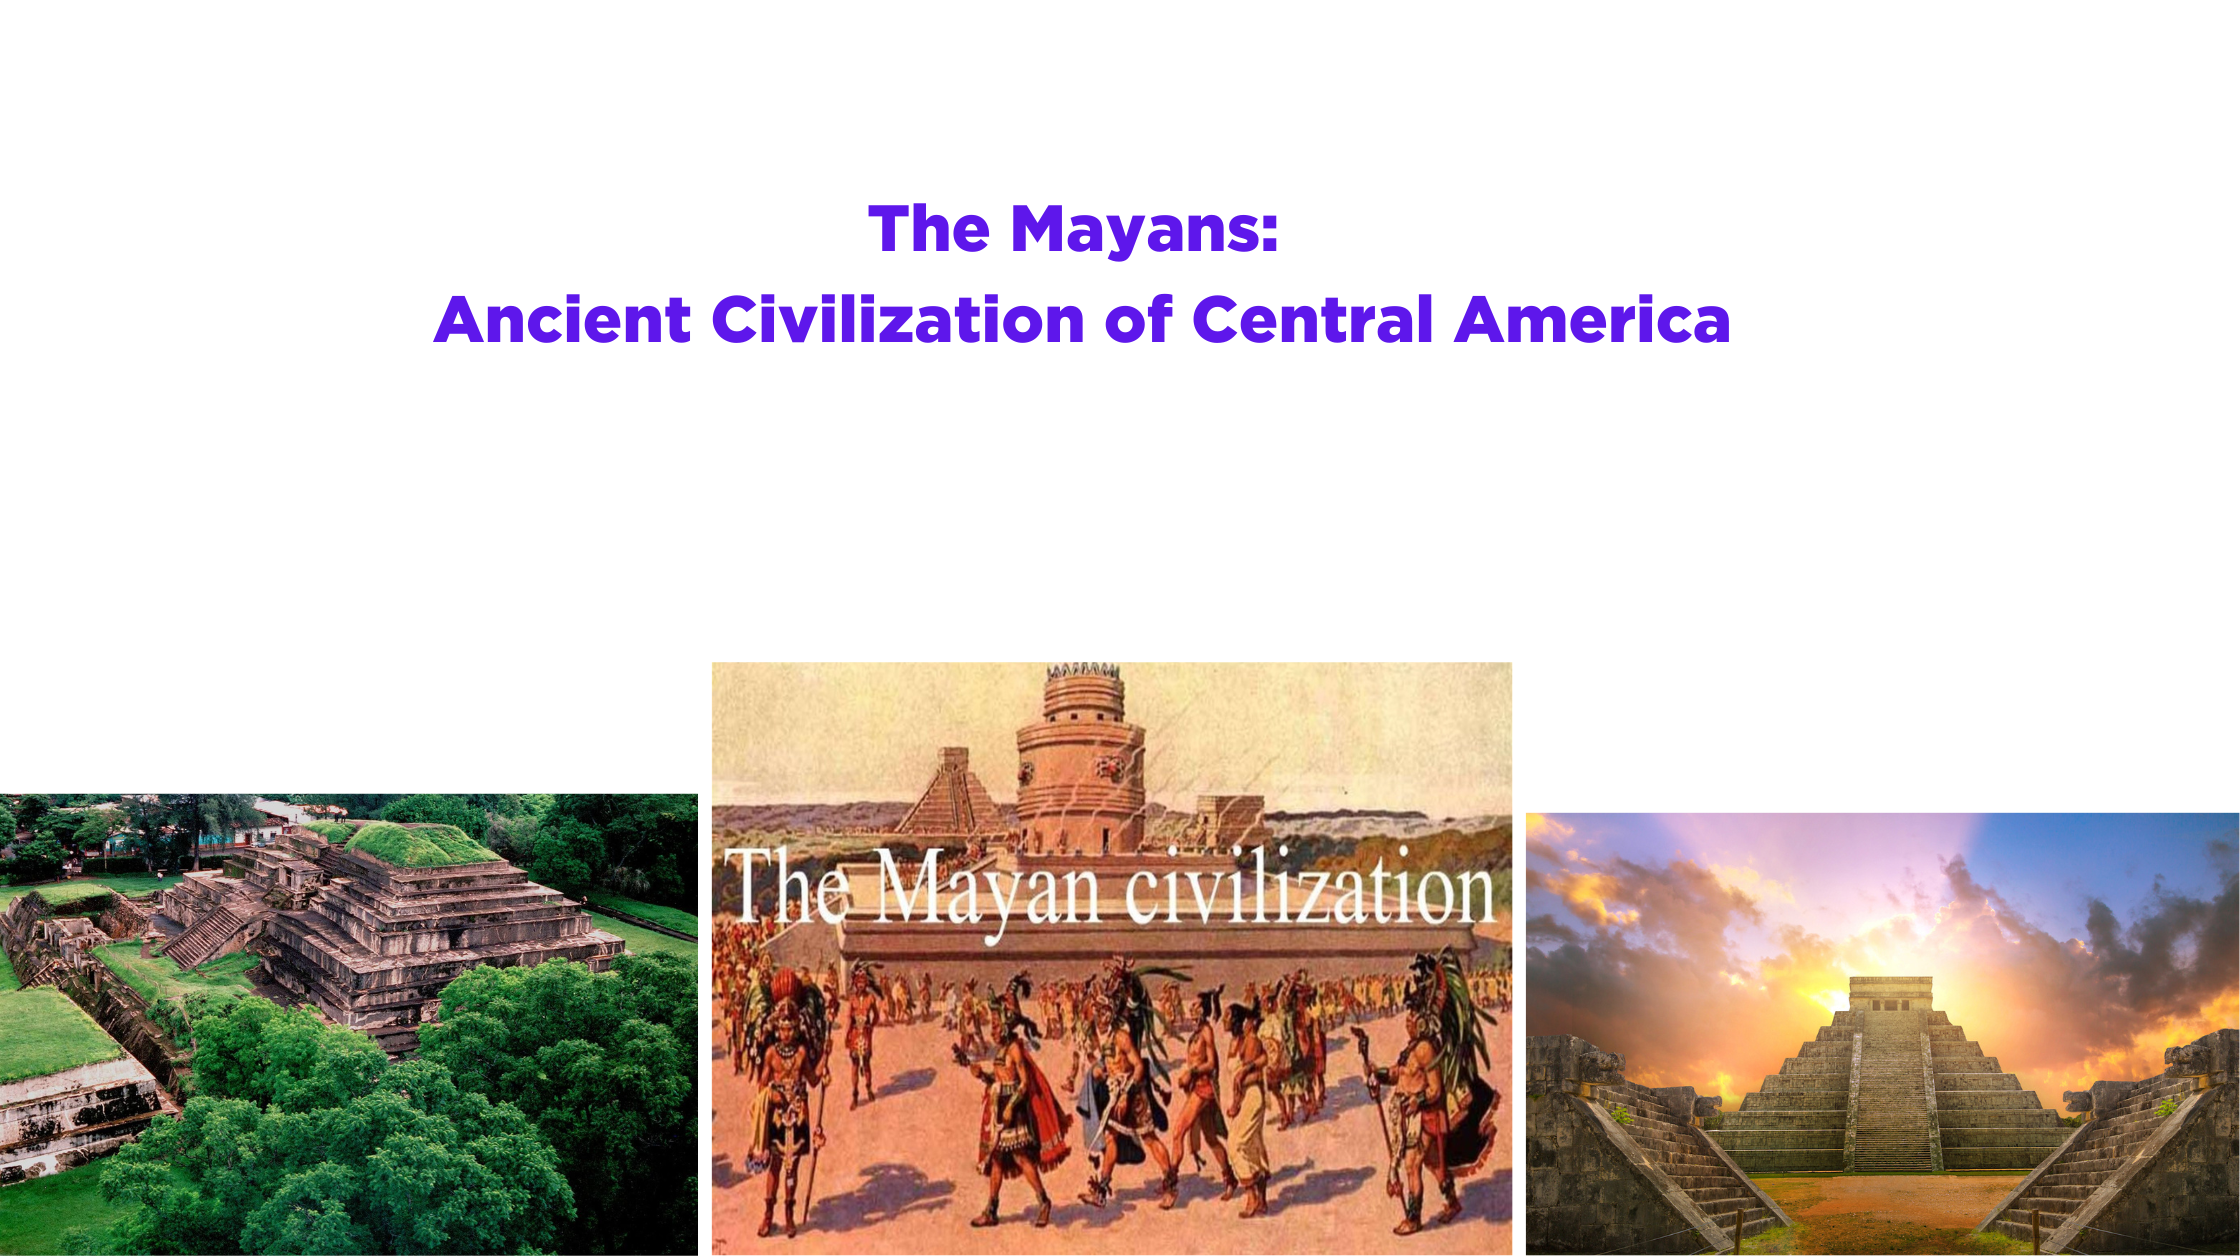 The Mayans: Ancient Civilization of Central America